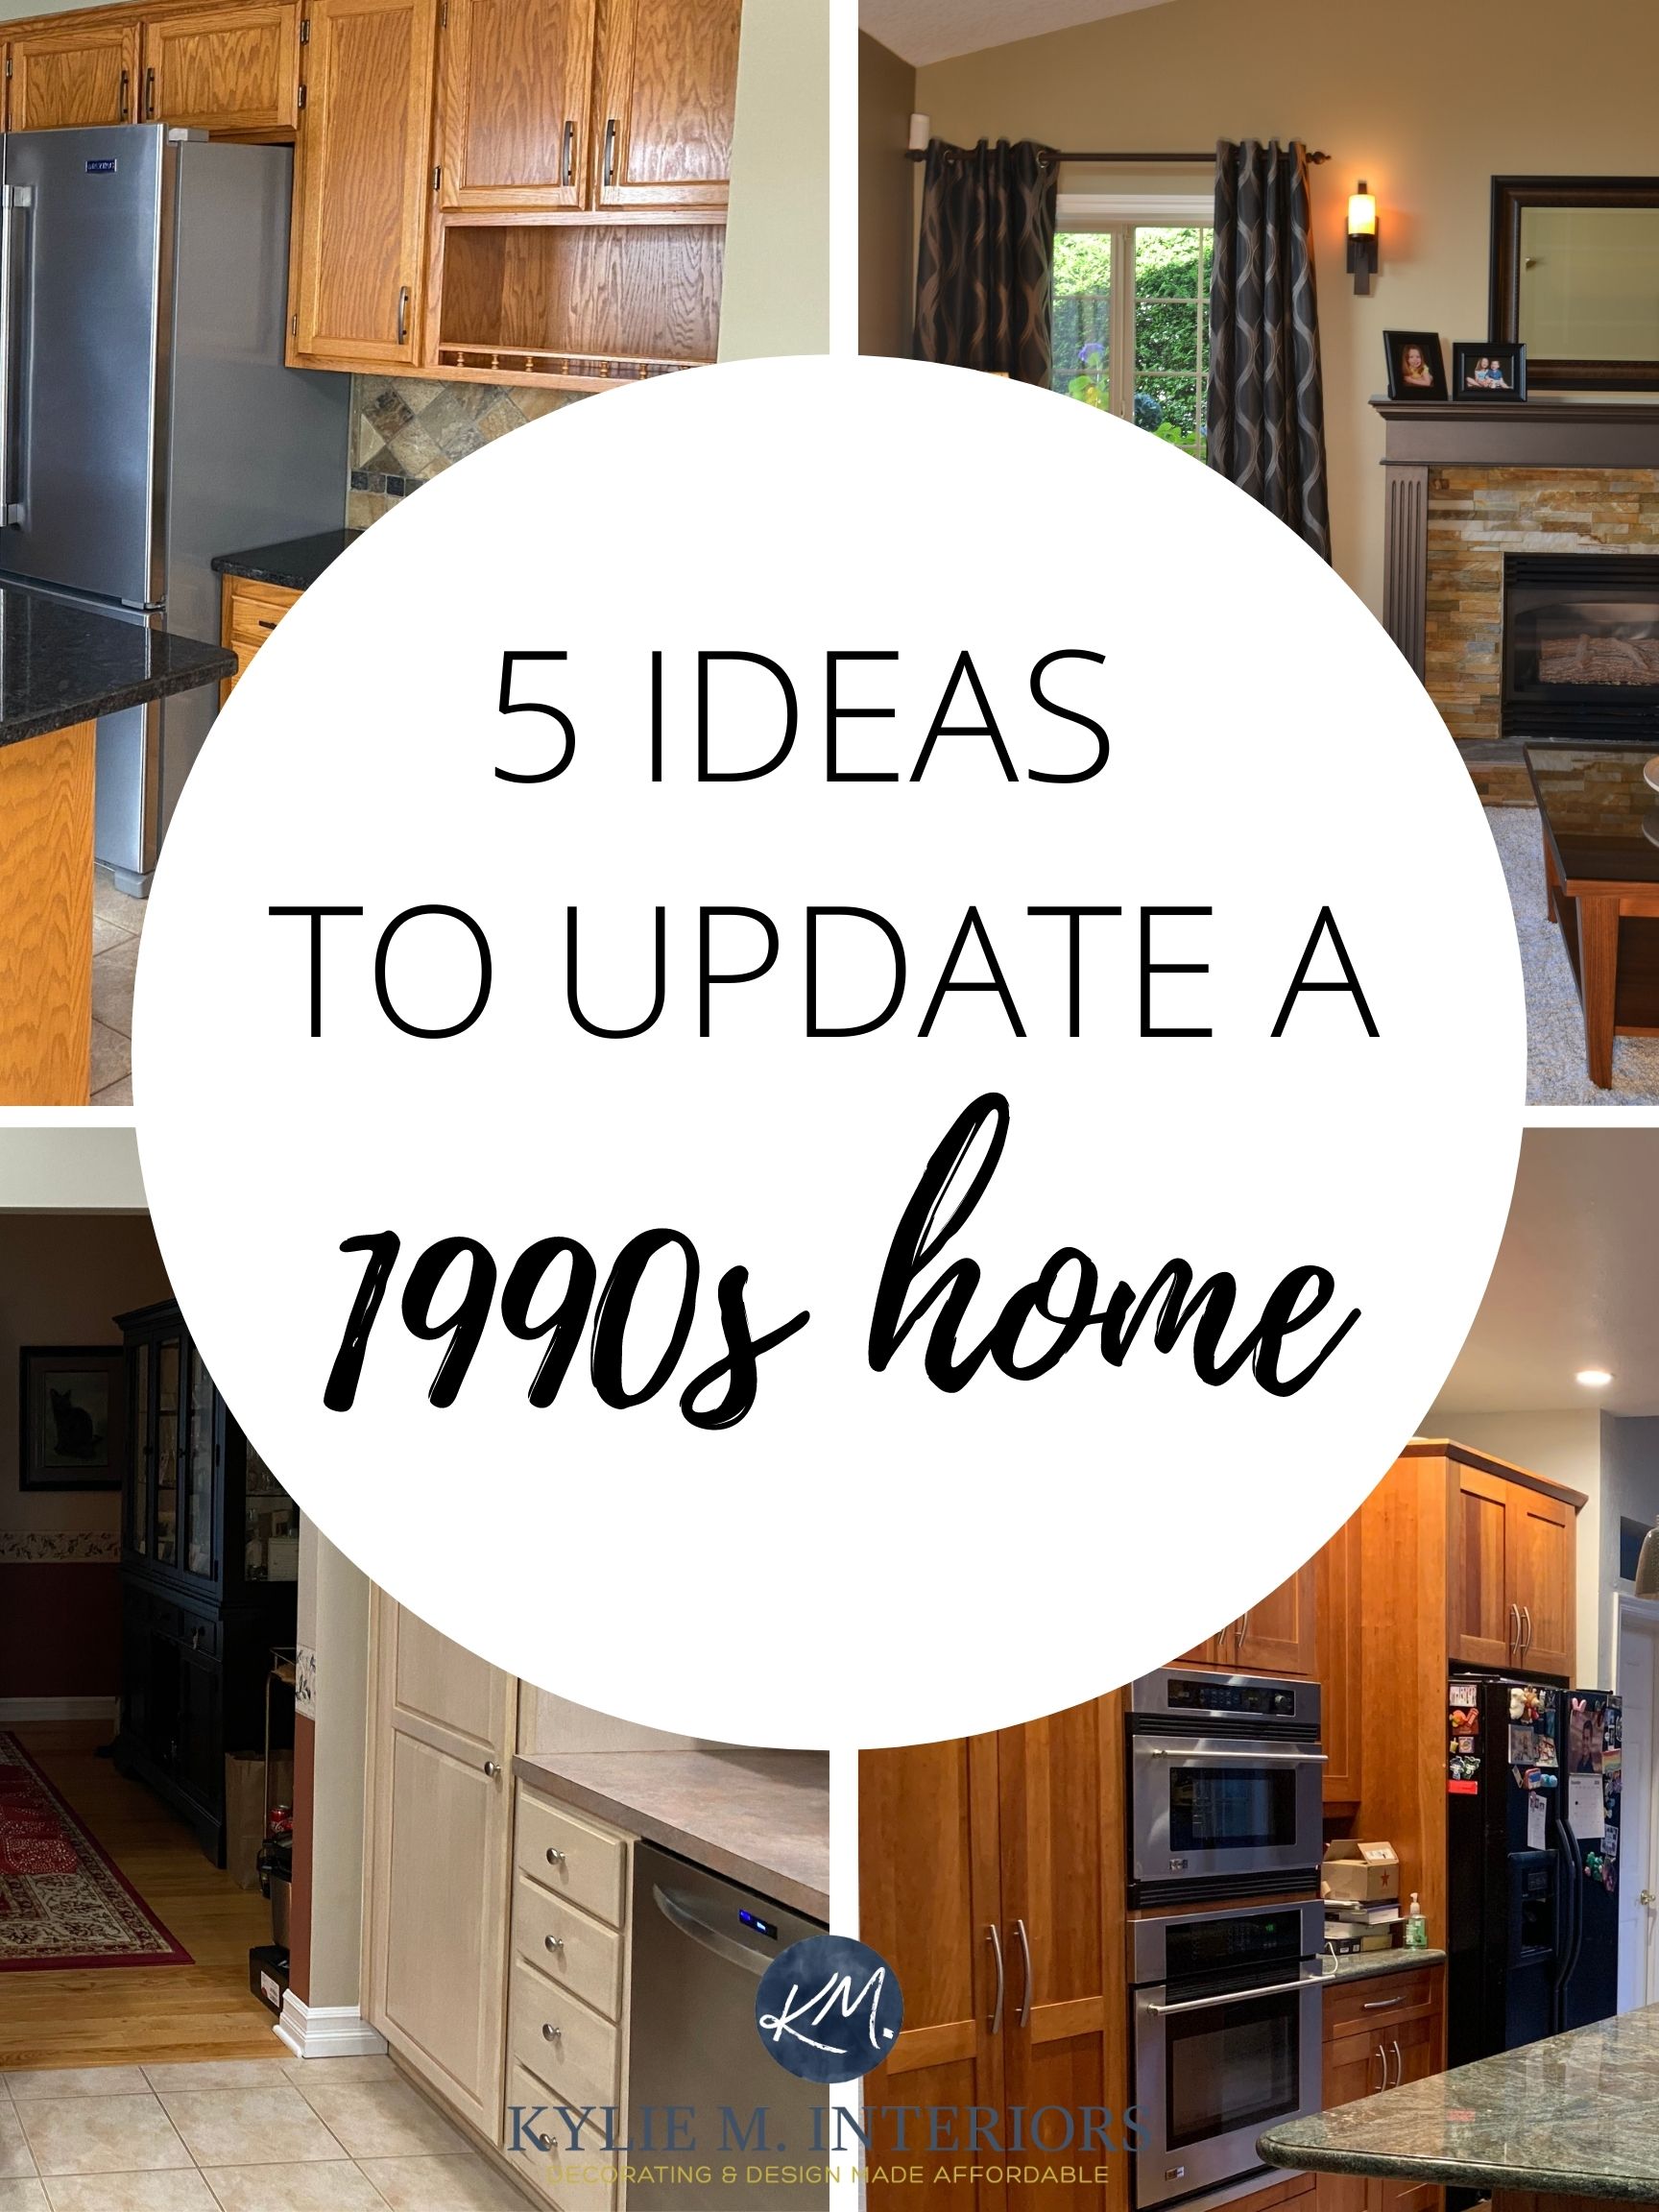 ideas and tips to update and modernize a 1990s home, granite, beige tile and more. Kylie M Interiors Edesign, diy advice